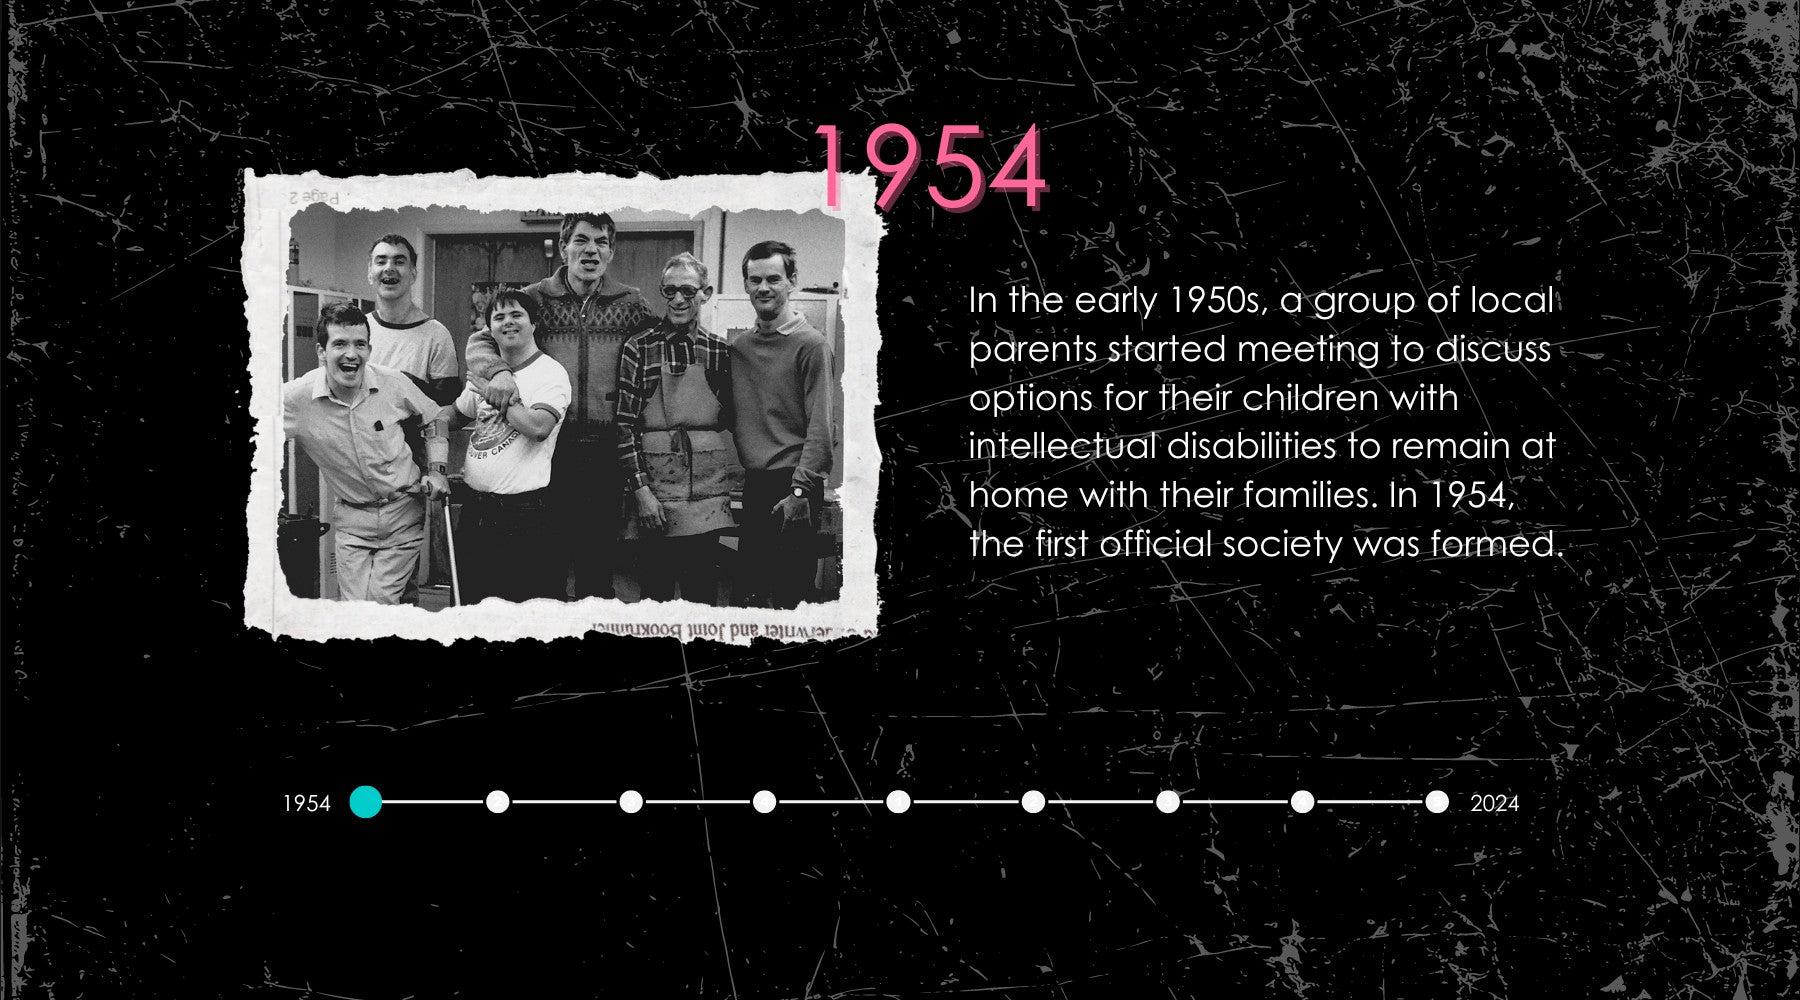 1954 timeline image of a group of men with intellectual disabilities who attended inclusion's first school